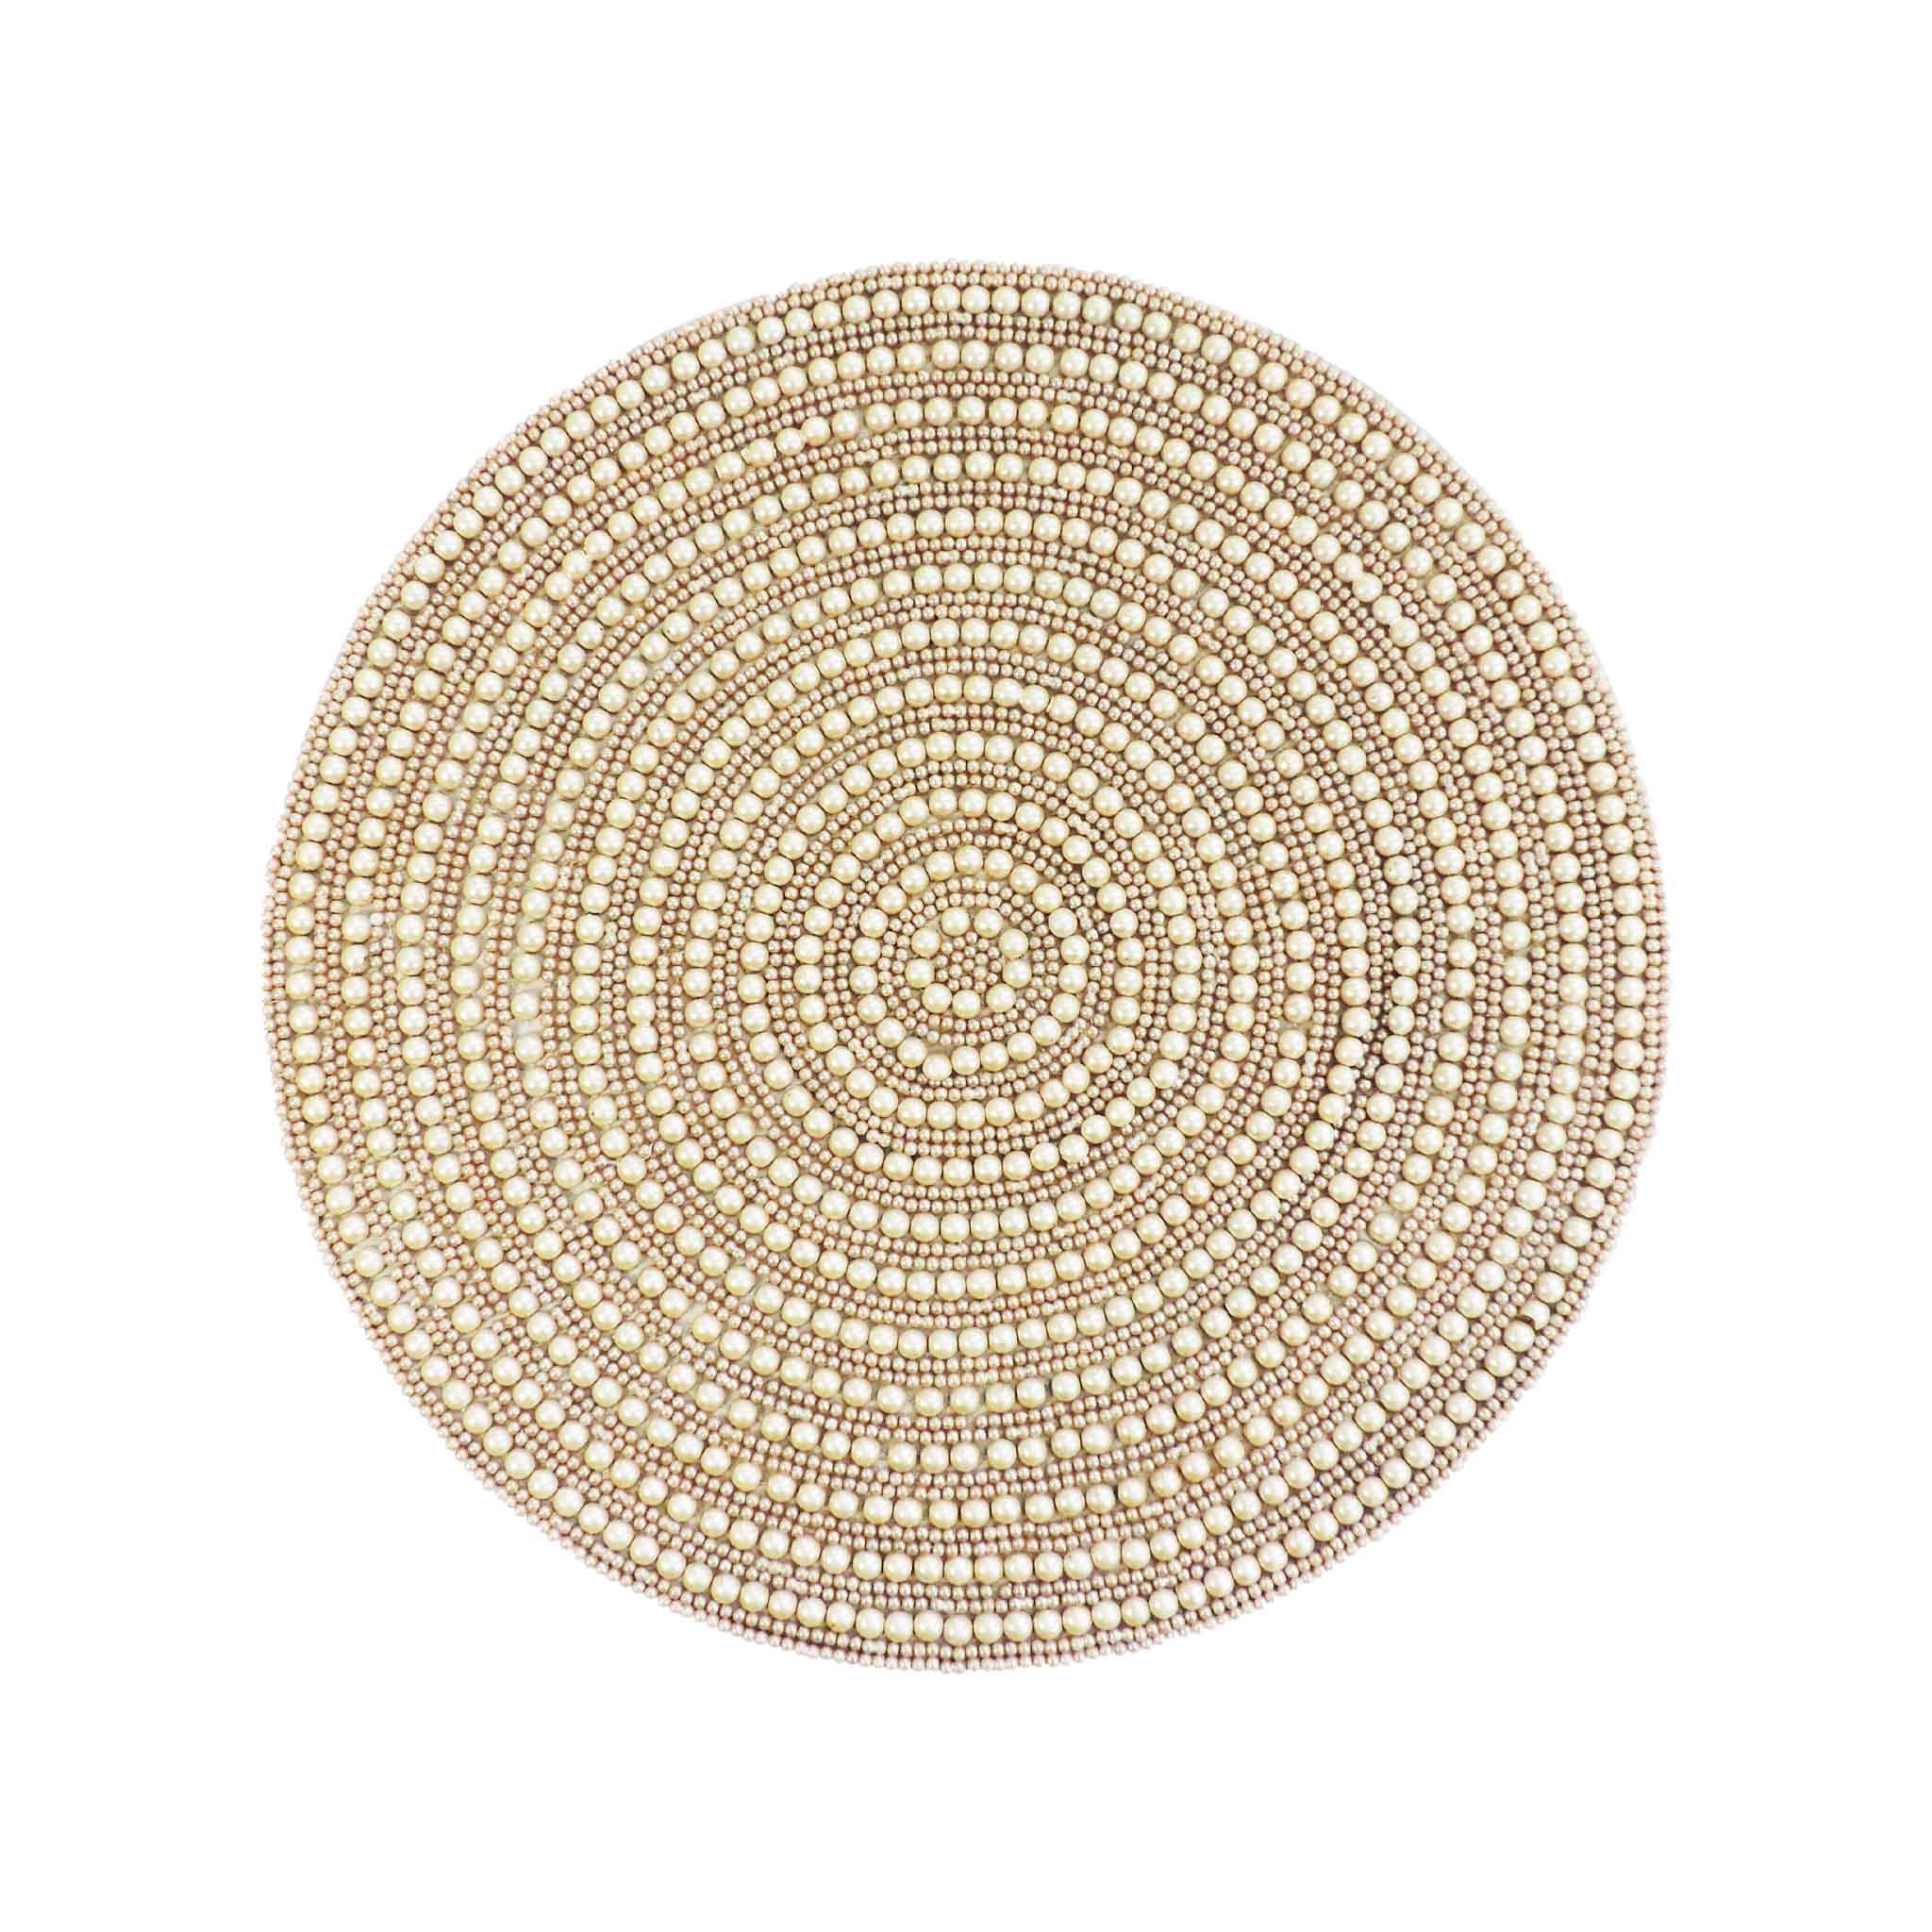 Whirl Bead Embroidered Placemat<br>Color: Grey <br>Size: 14" Round<br>Set of 2/4